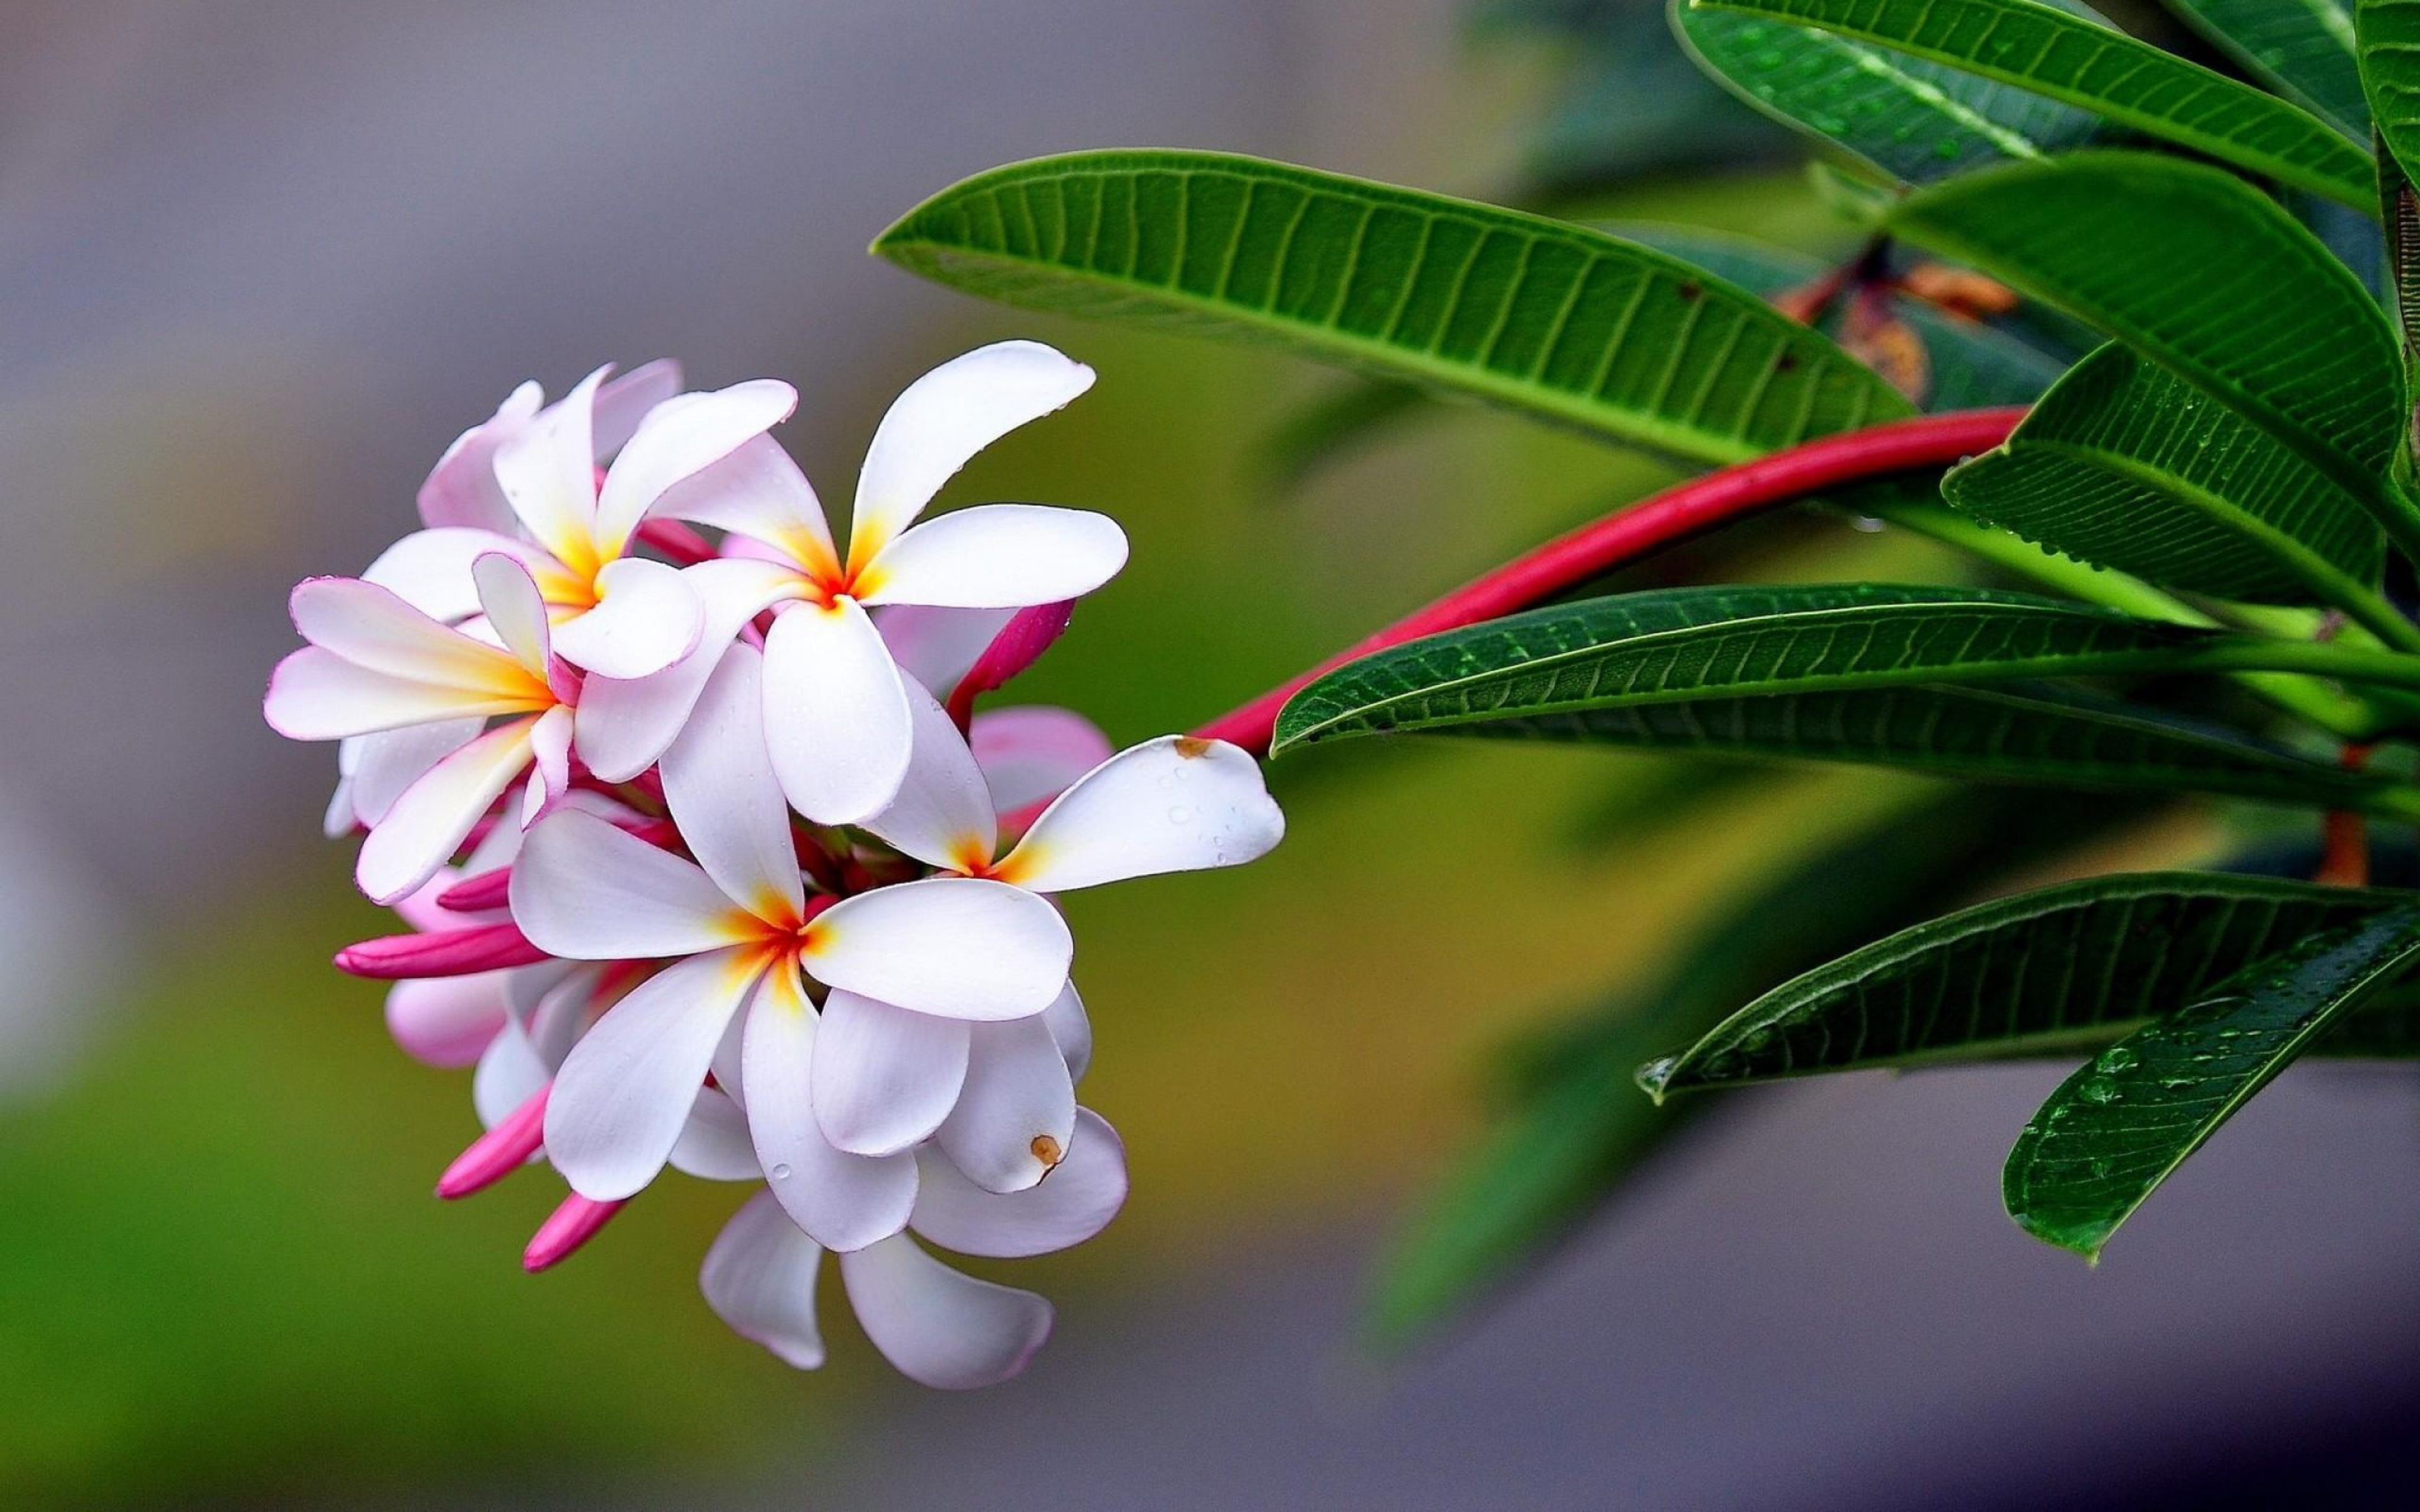 Plumeria Branch With Green Leaves And White Flowers Wallpaper Hd